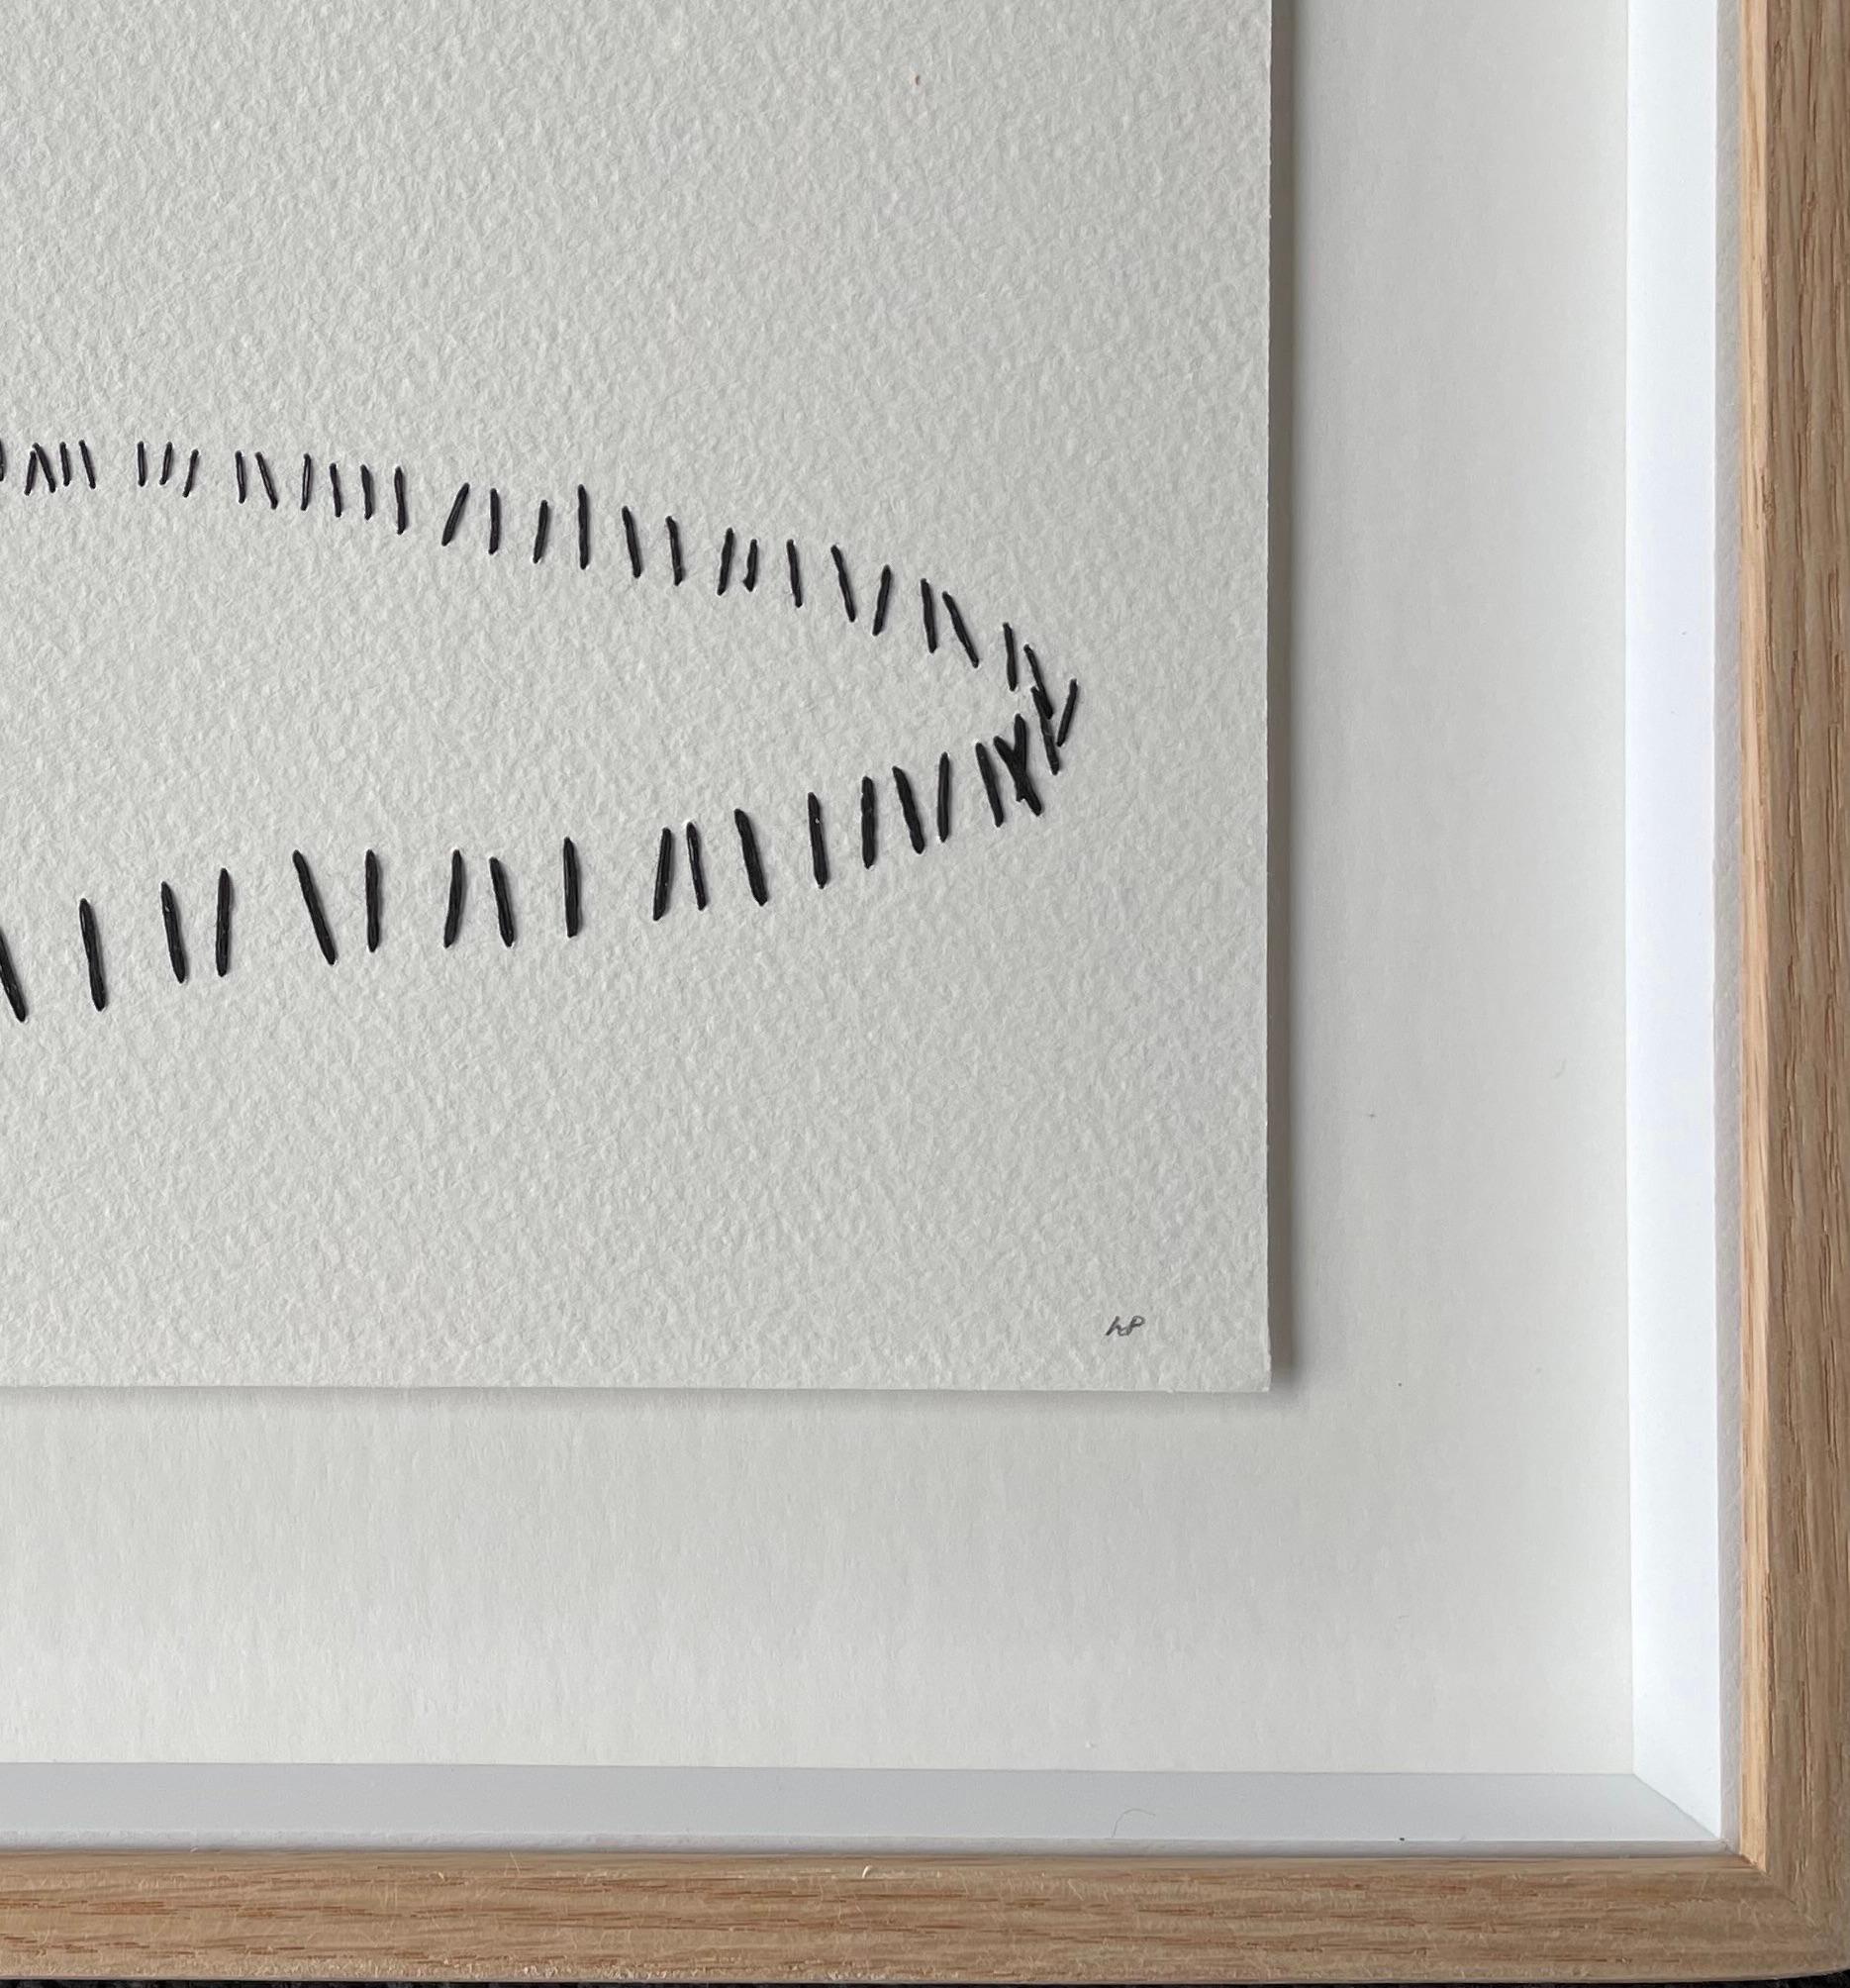 Contemporary French artist Krystyna Pieter uses black thread to create a fence design on white background.
Sits well with P1525.
Framed in bleached oak.
Signed by the artist.